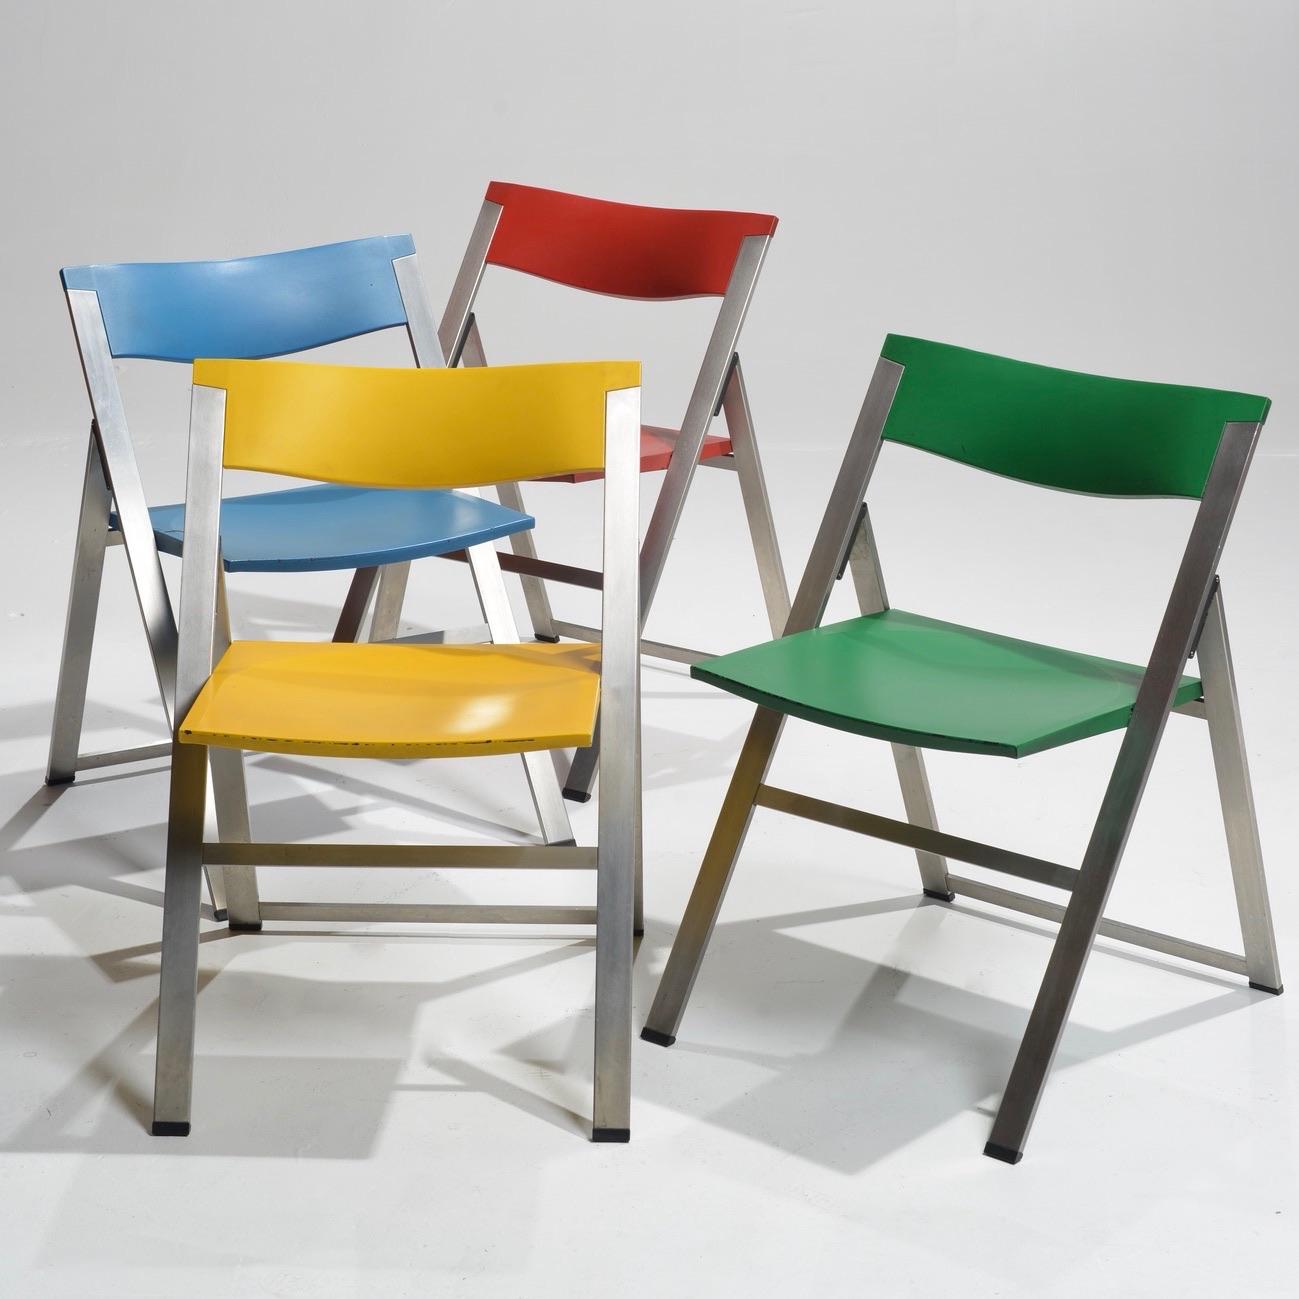 Post-Modern Set of 4 P08 Folding Chairs by Justus Kolberg for Tecno, Italy